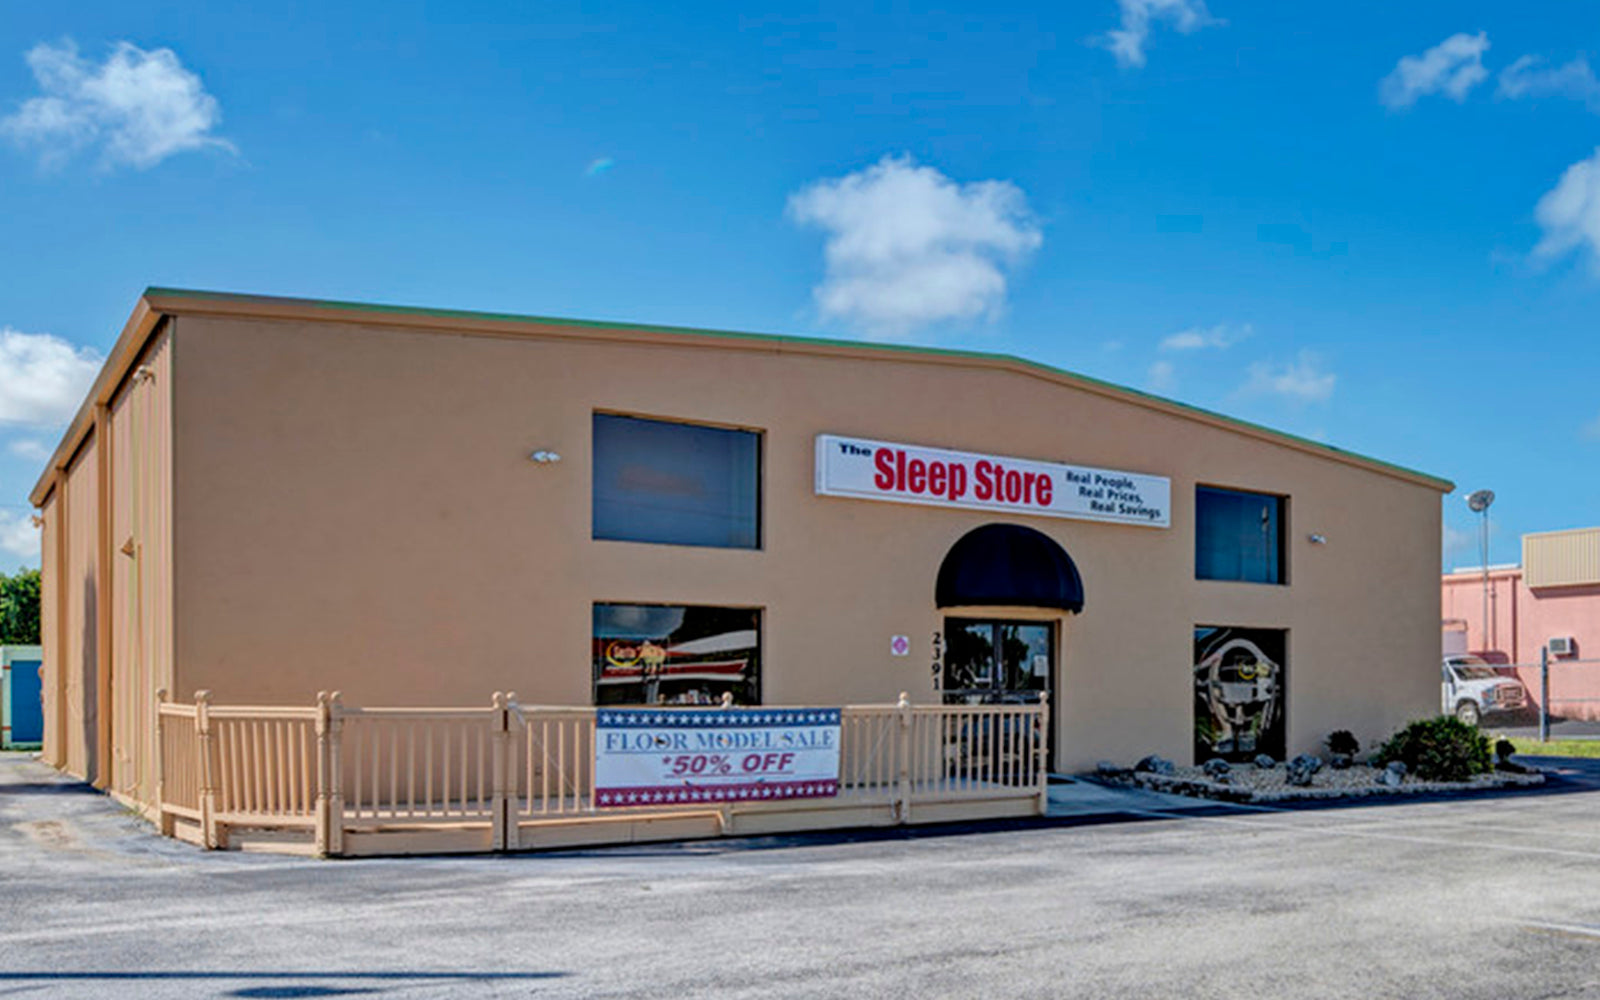 Harvest Green Mattress Experience Partner The Sleep Store Englewood, FL Try Your Mattress Before You Buy It